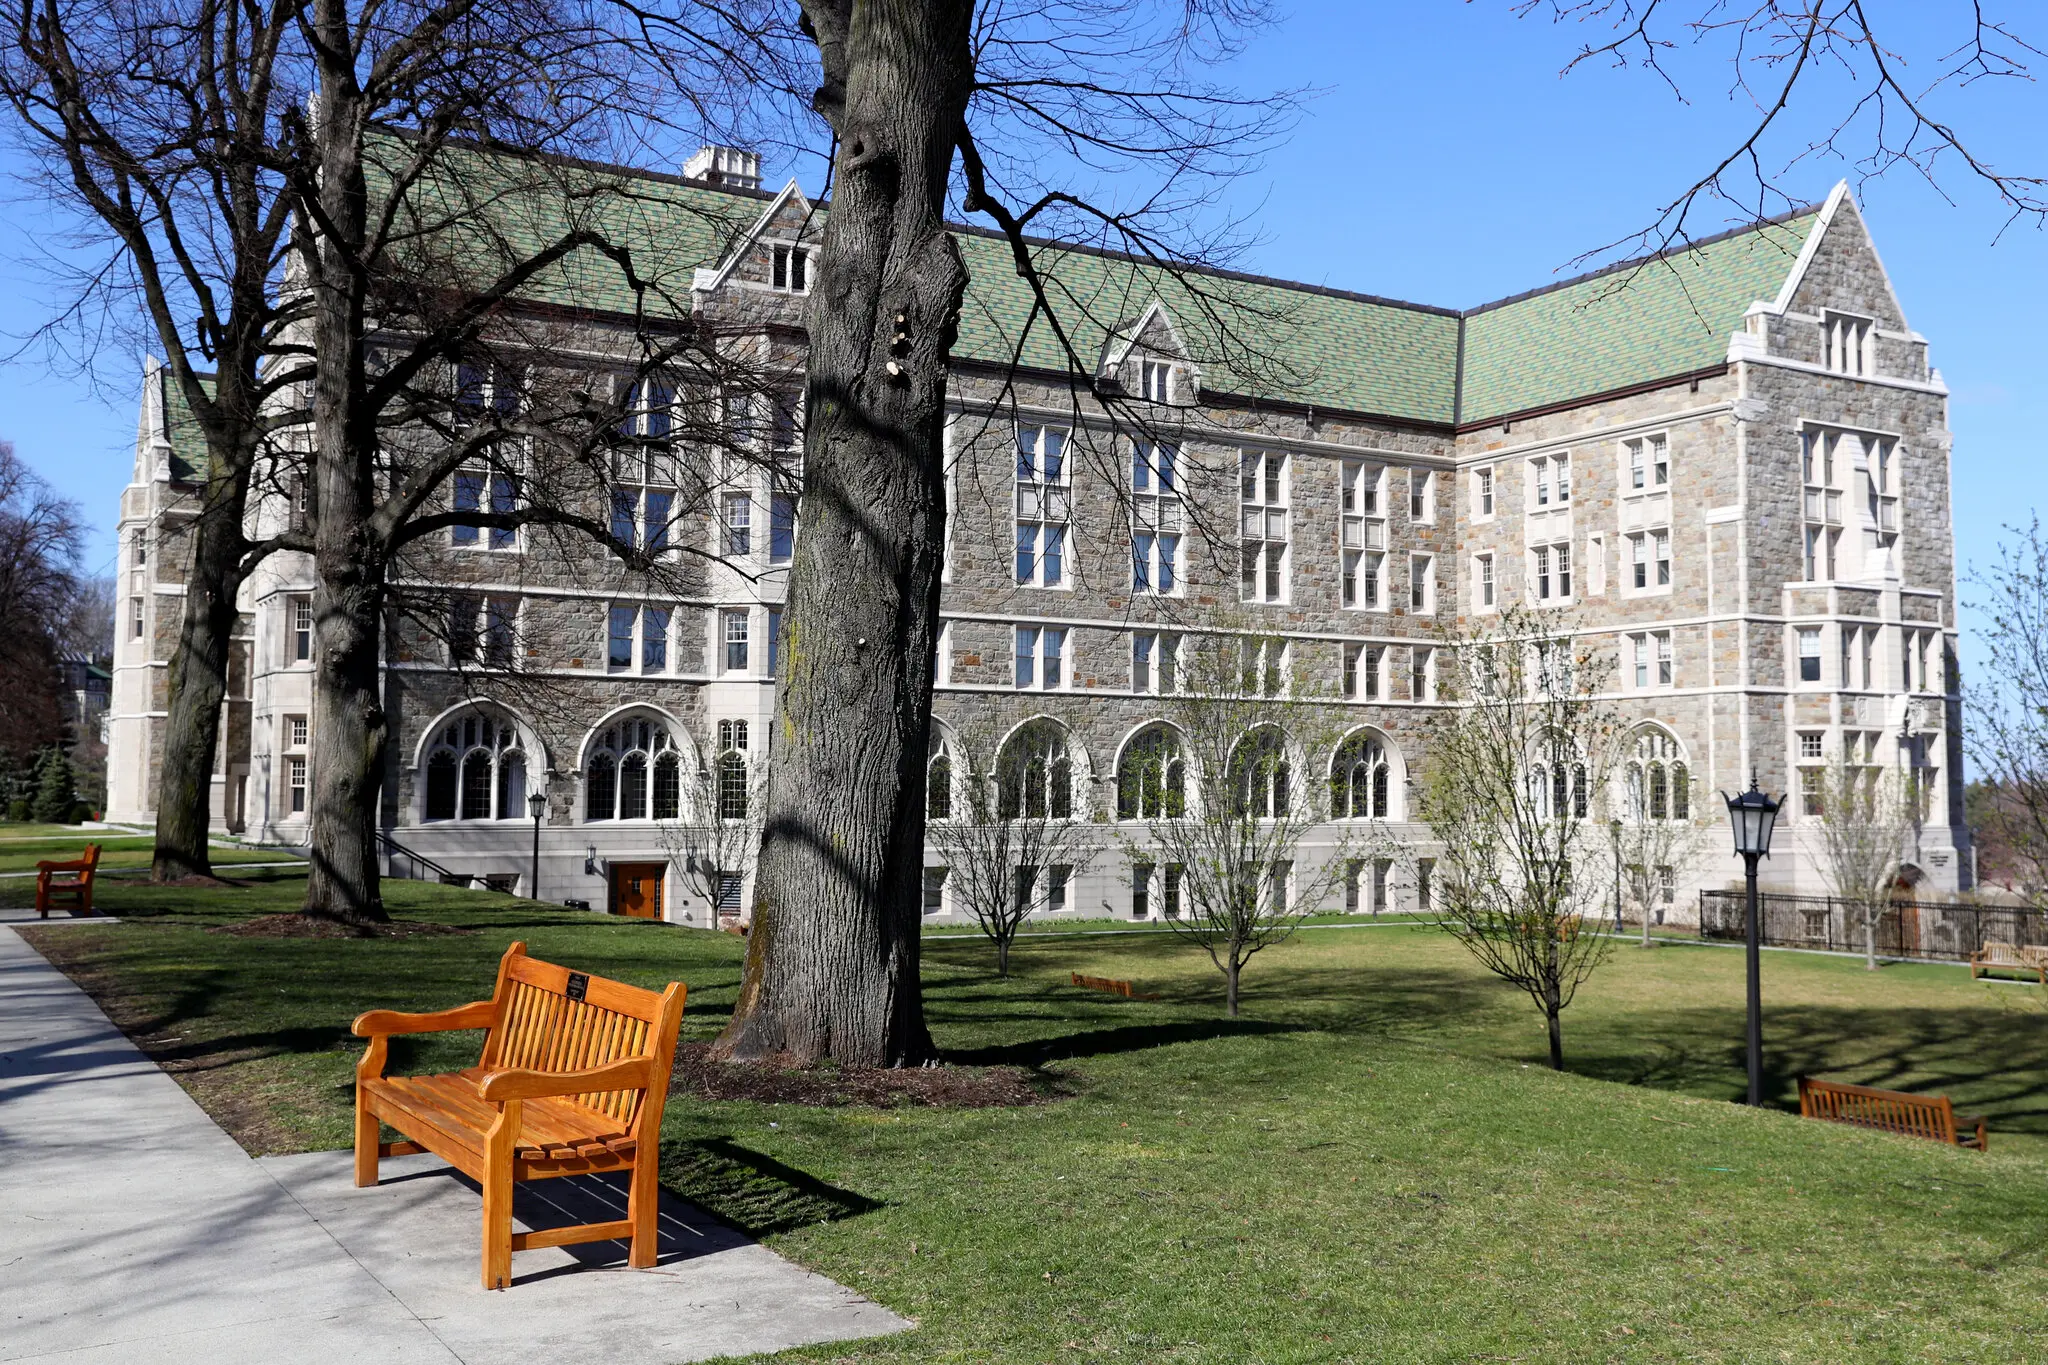 A fine of $3,000 and a one year jail sentence is the punishment in Massachusetts for hazing